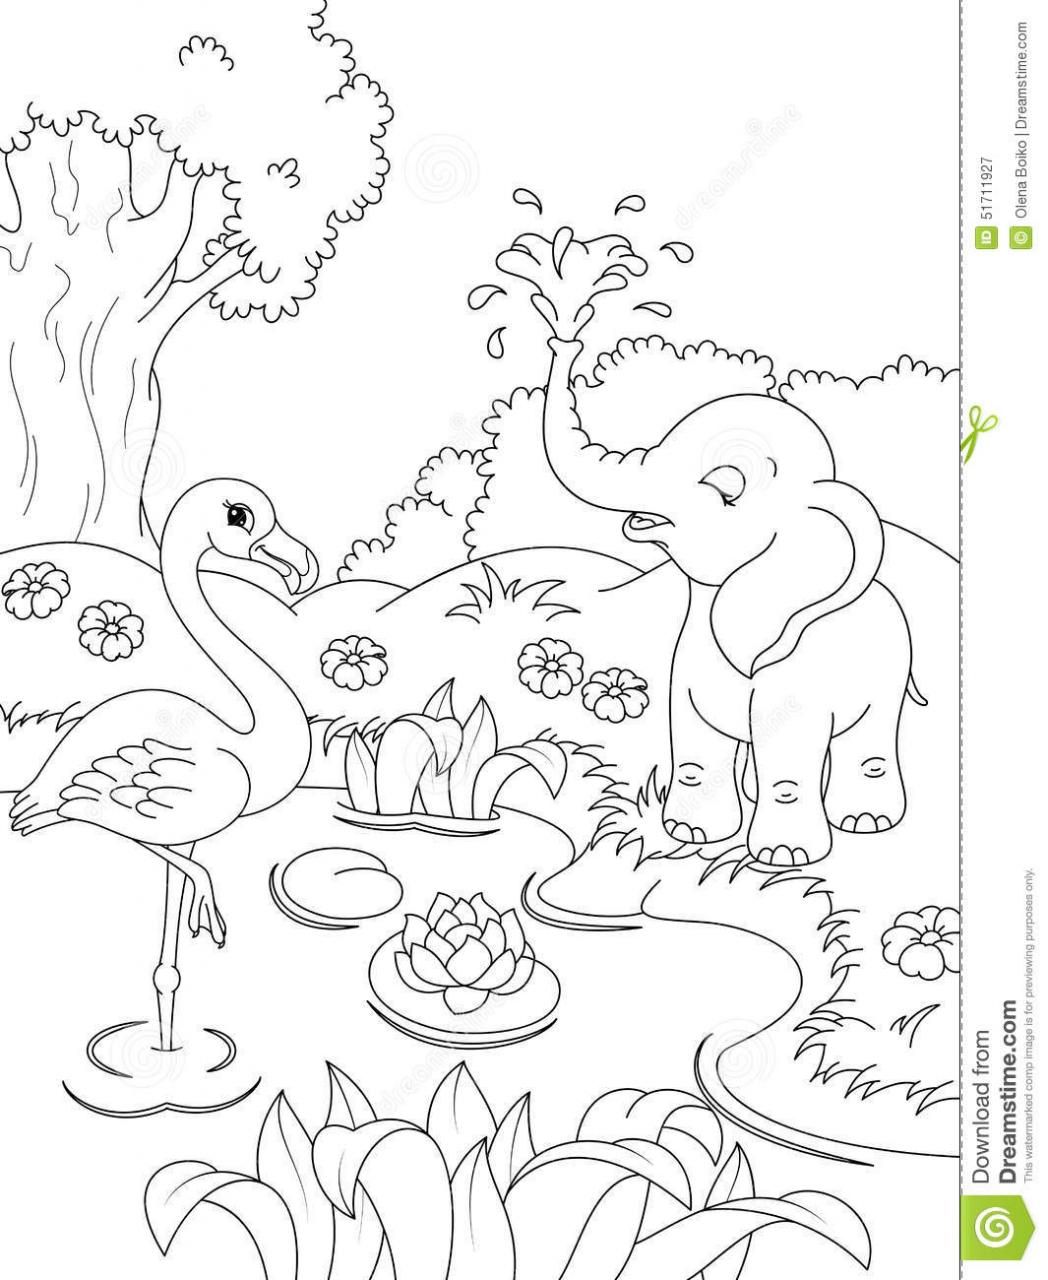 Nature Animal Coloring Page Coloring Page For Kids - Coloring Home